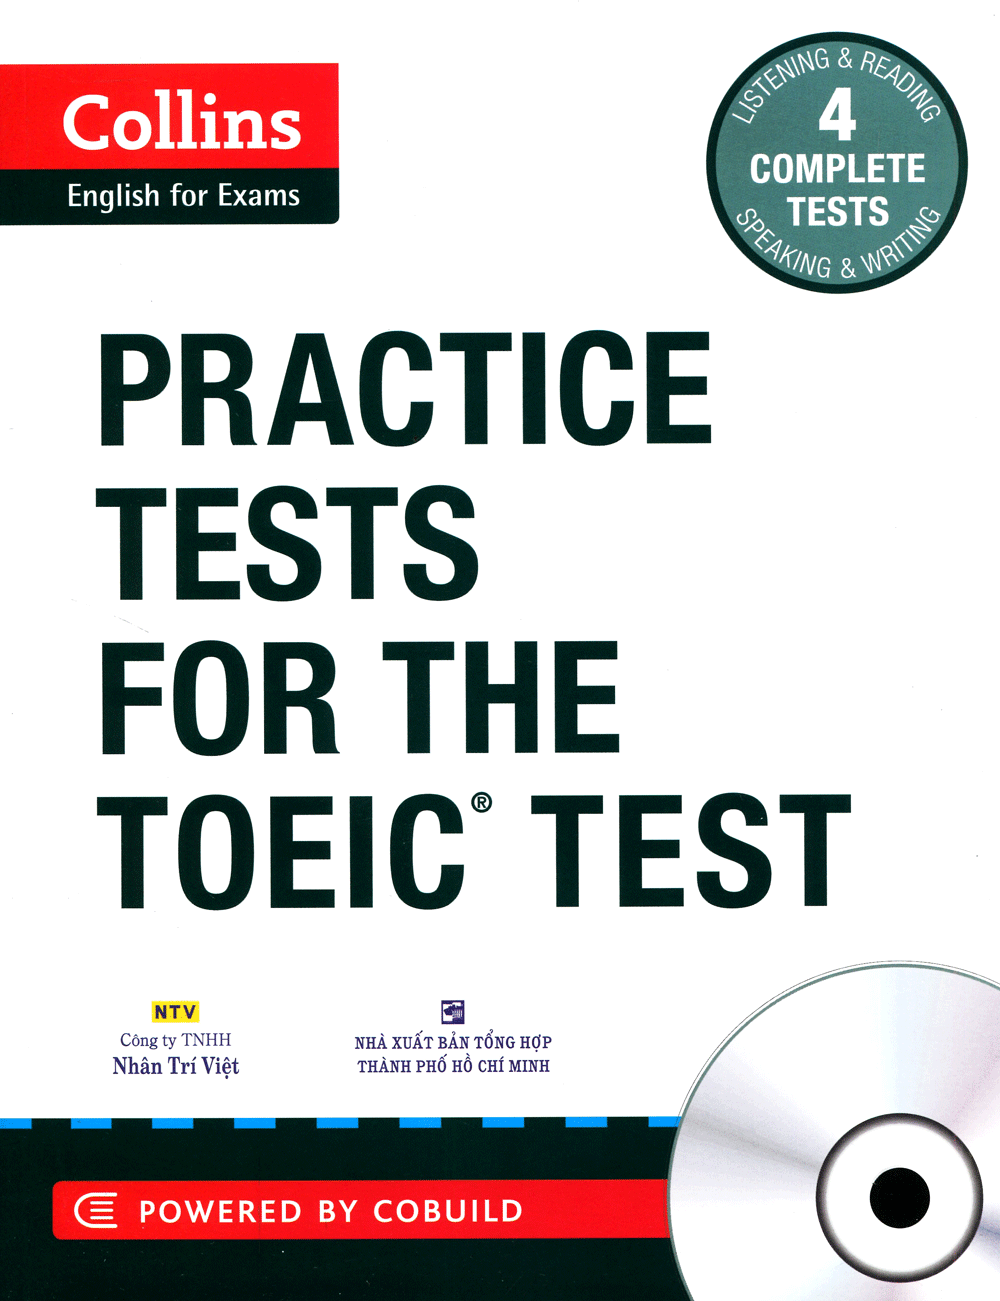 Collins English For Exams Practice Test For The TOEIC Test